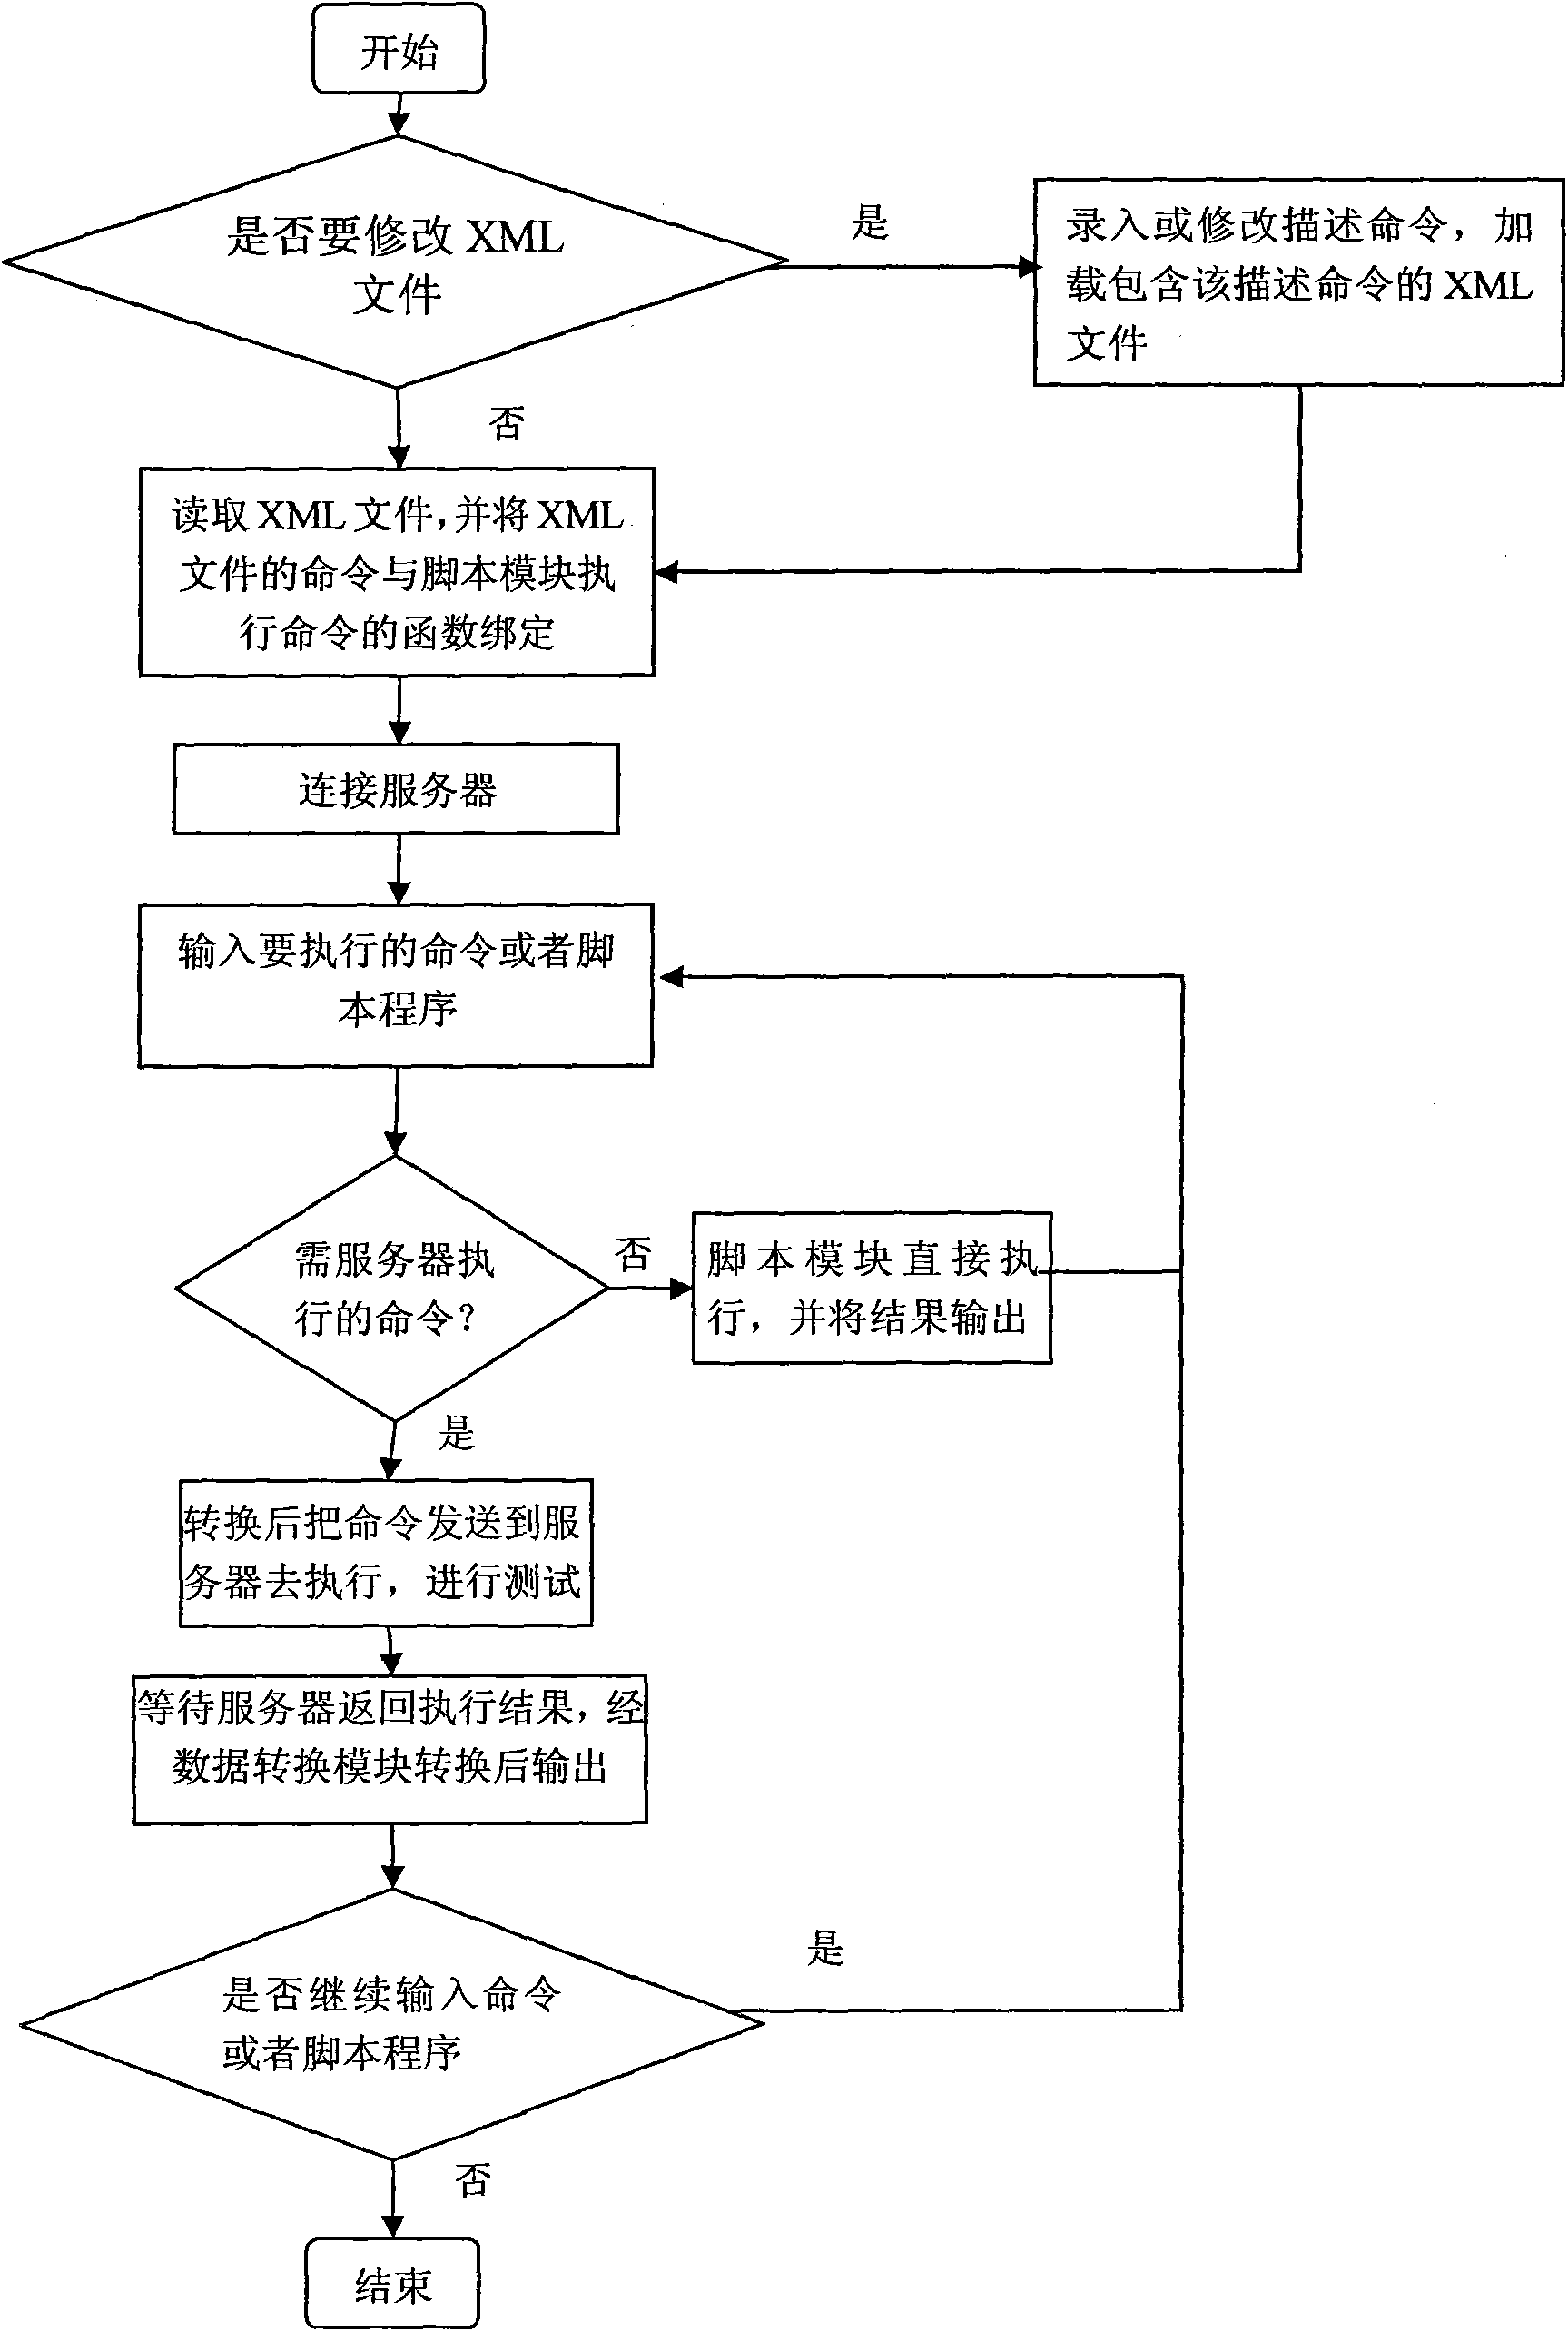 Programmable network service automation test system and programmable network service automation method